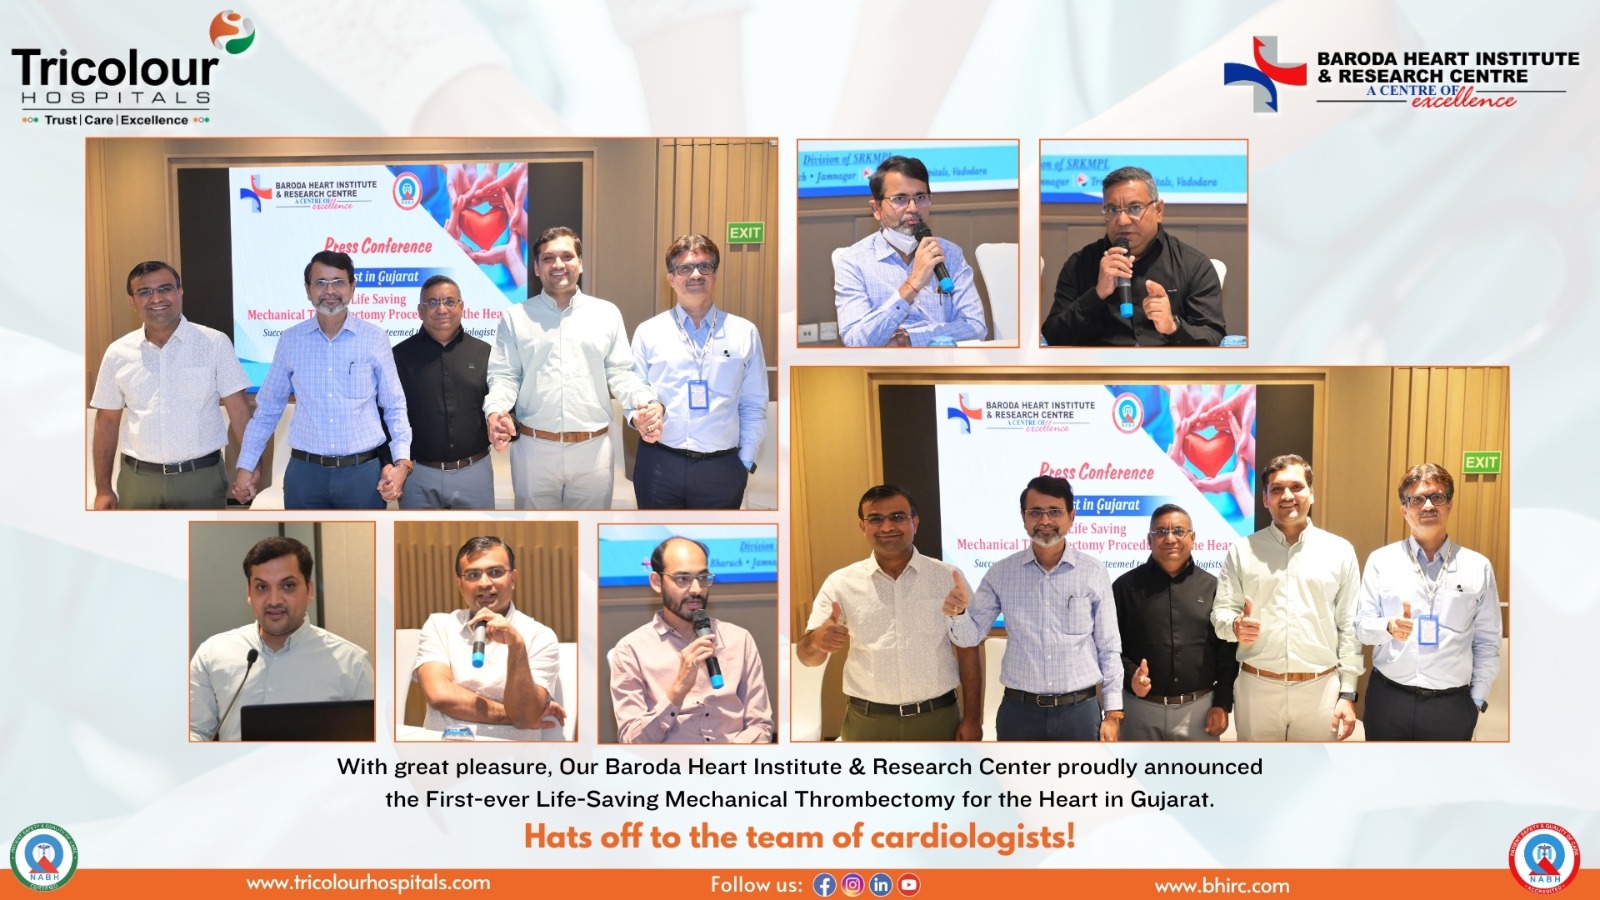 Baroda Heart Institute & Research Centre proudly announced the First-ever Life-Saving An Unique Intervention - Mechanical Thrombectomy for the heart in Gujarat. - Tricolour Hospital